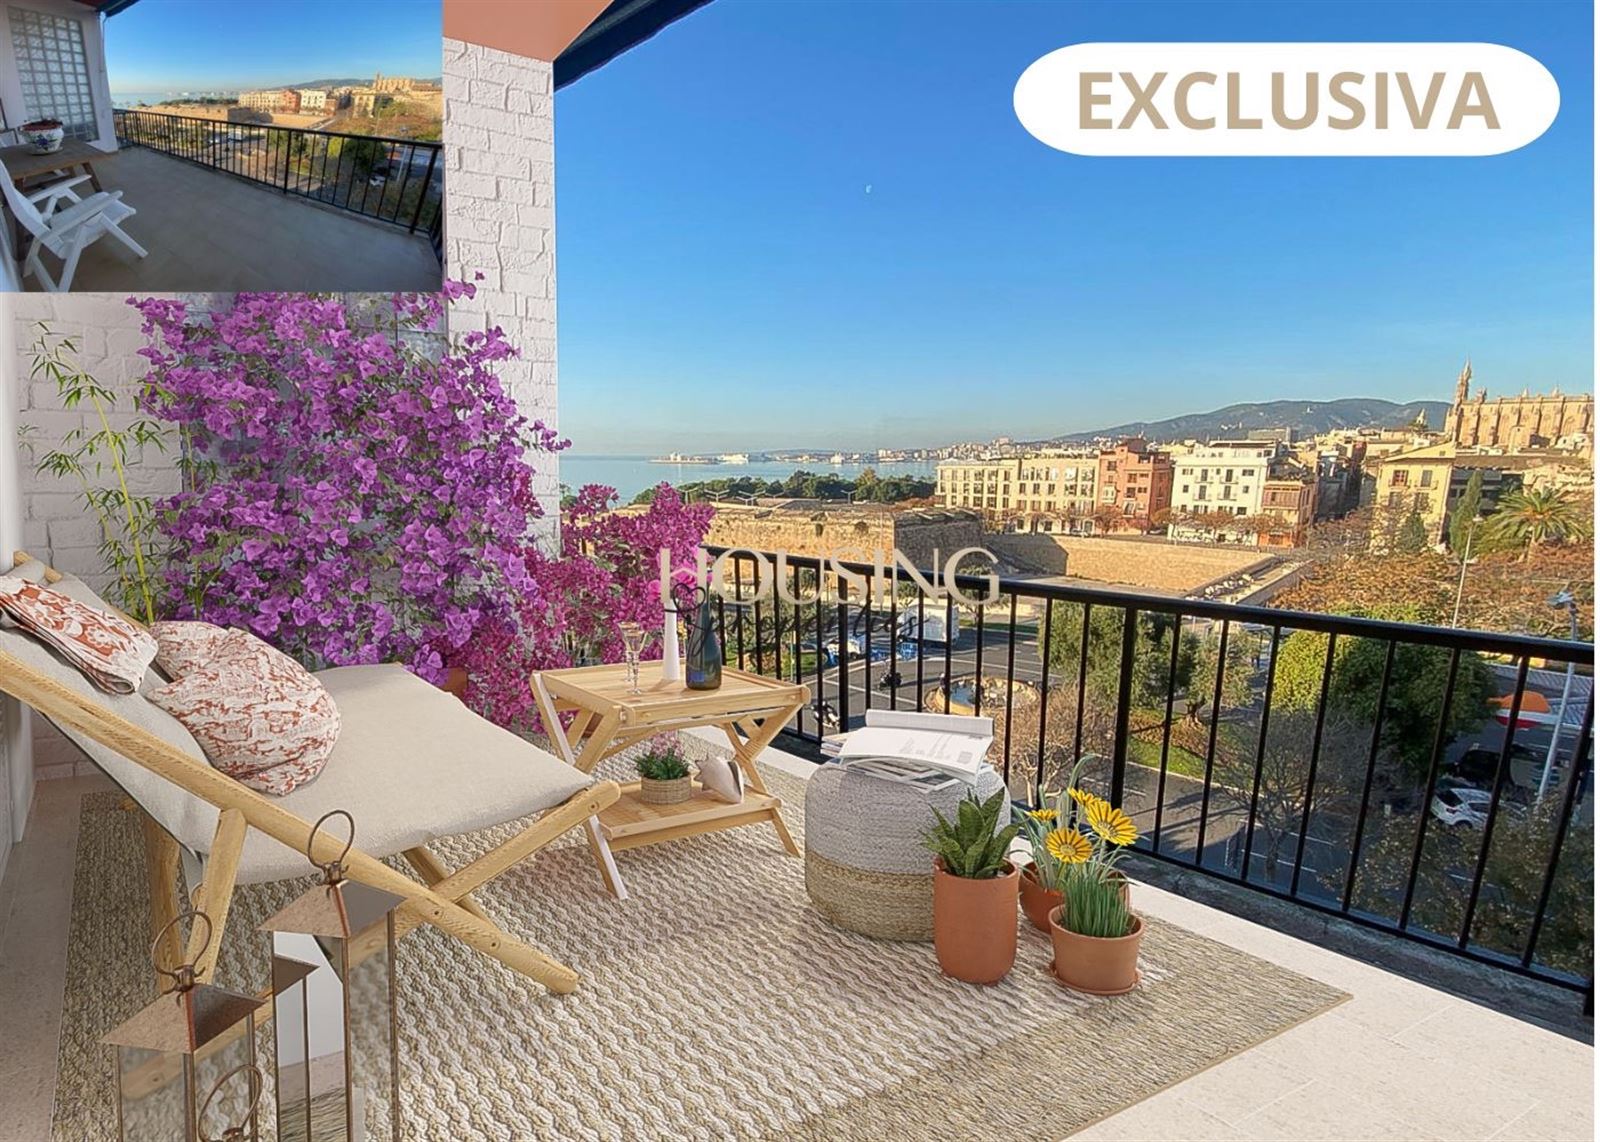 PENTHOUSE IN AVENIDA GABRIEL ALOMAR, A FEW METERS FROM THE SEA AND THE OLD TOWN OF PALMA